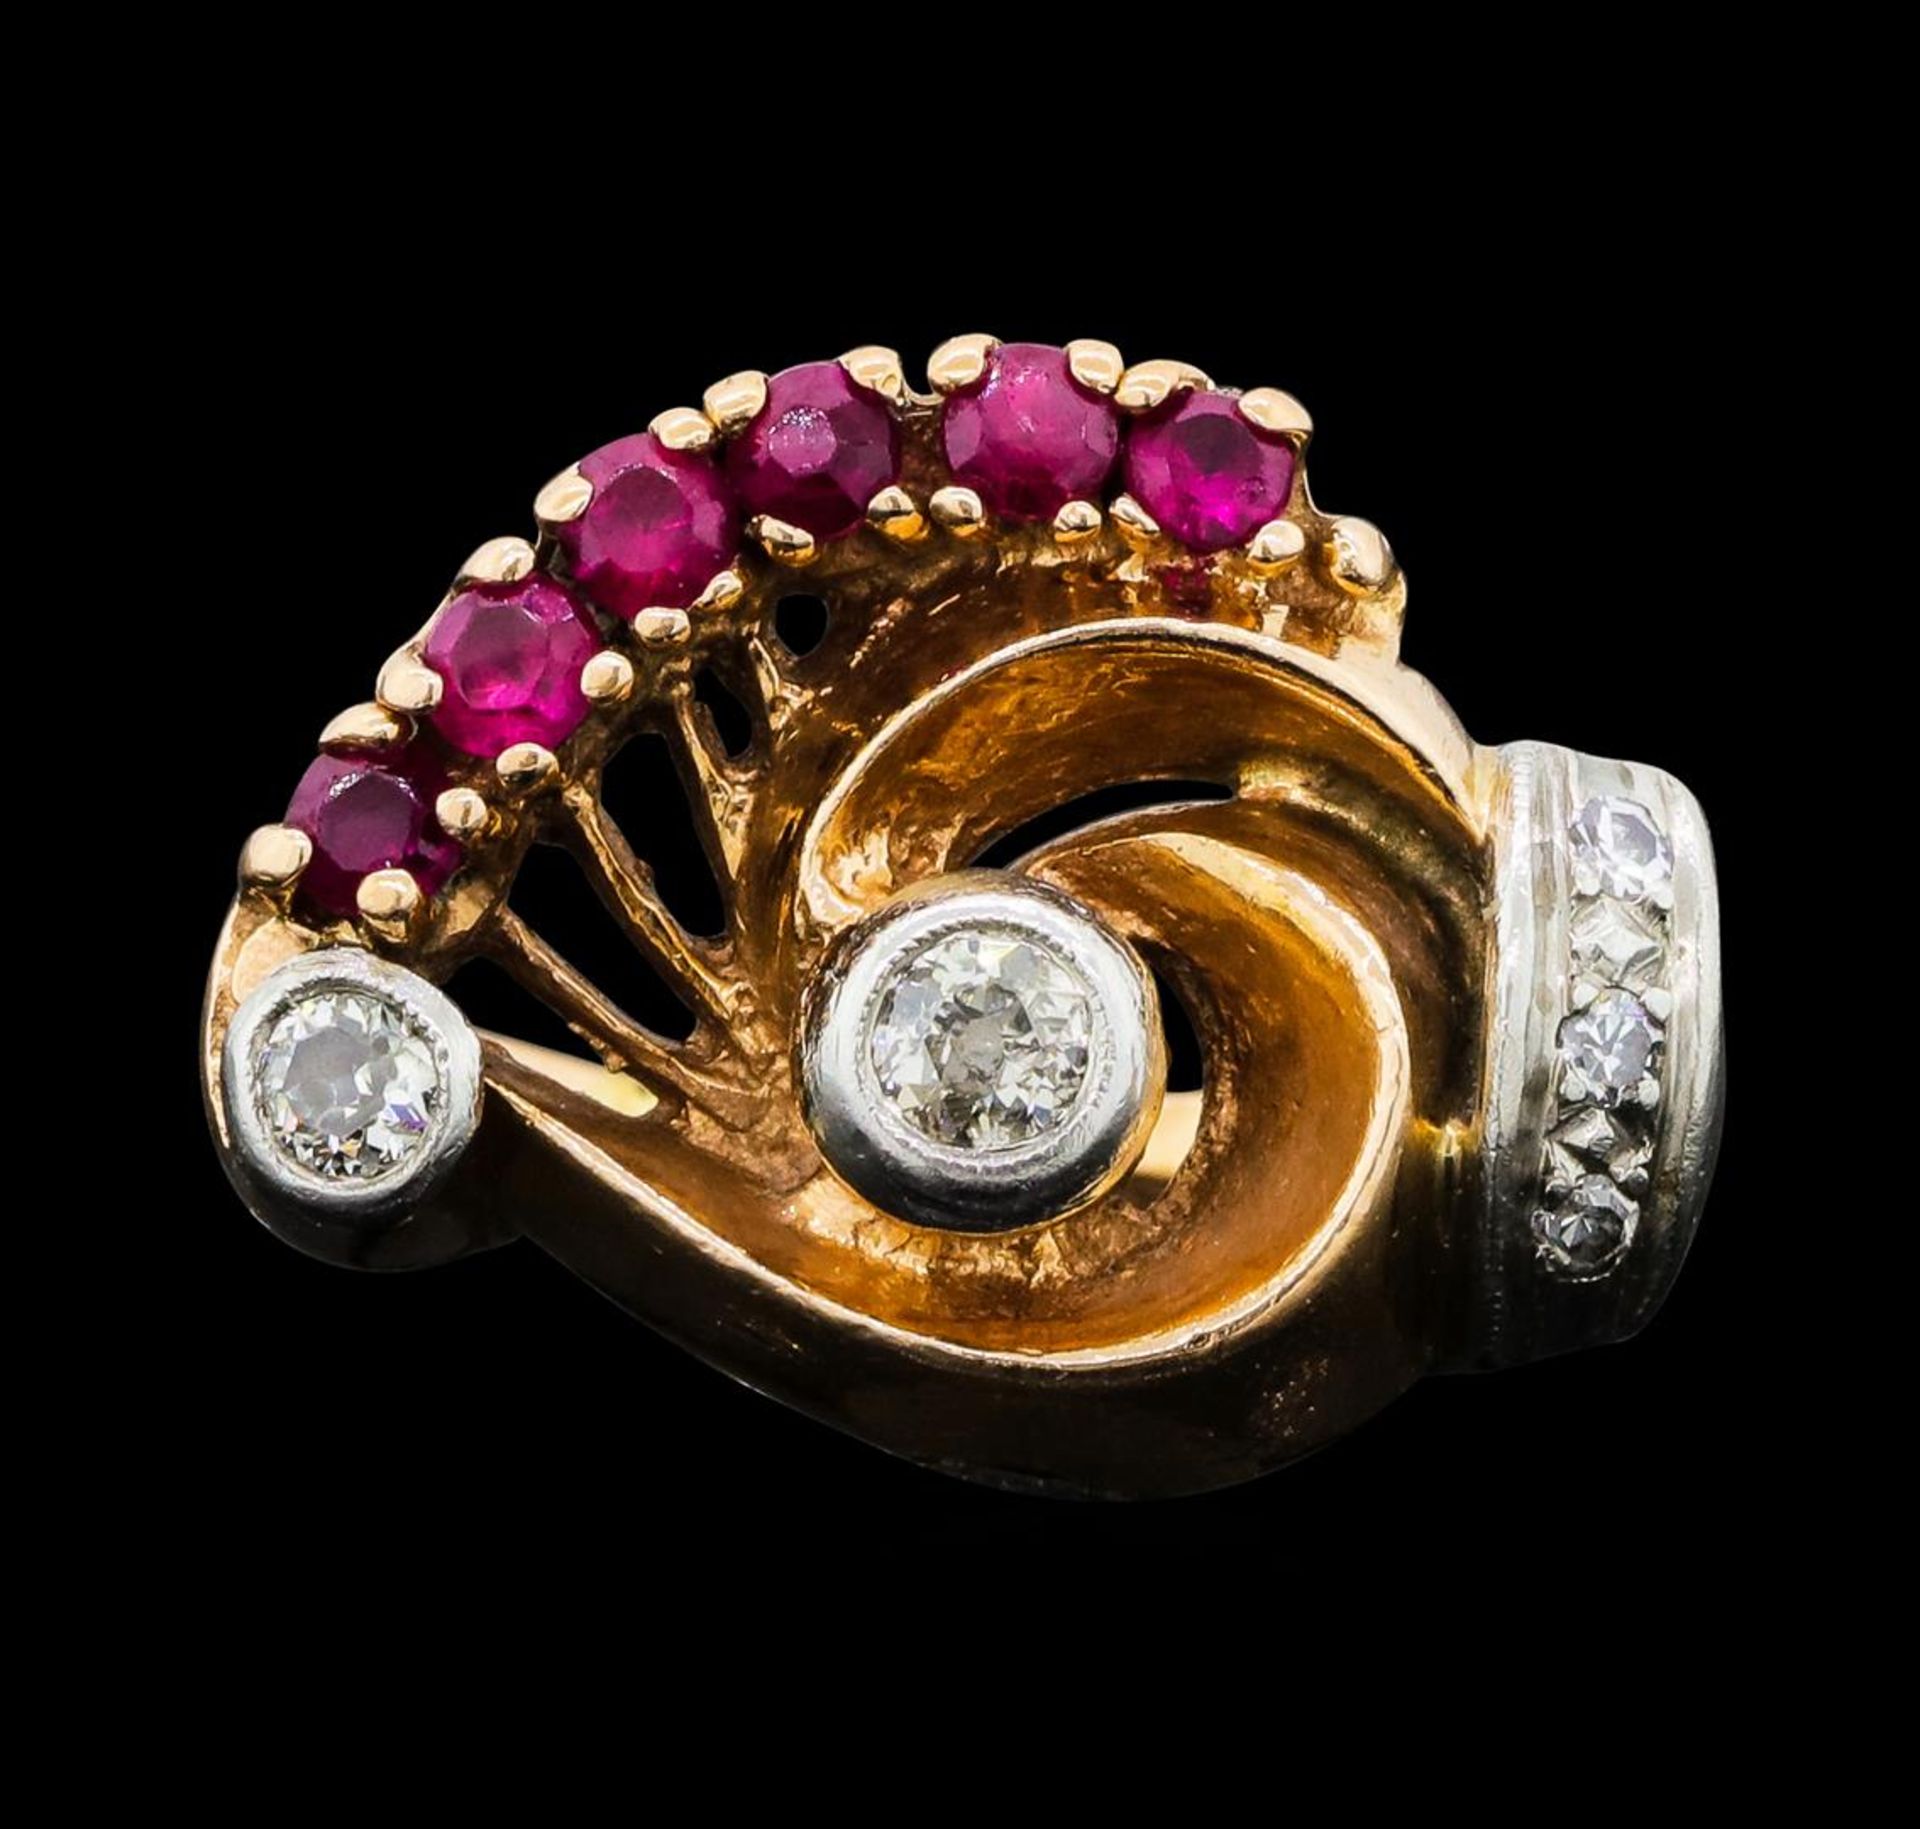 0.40 ctw Ruby and Diamond Ring - 14KT Rose and White Gold - Image 2 of 4